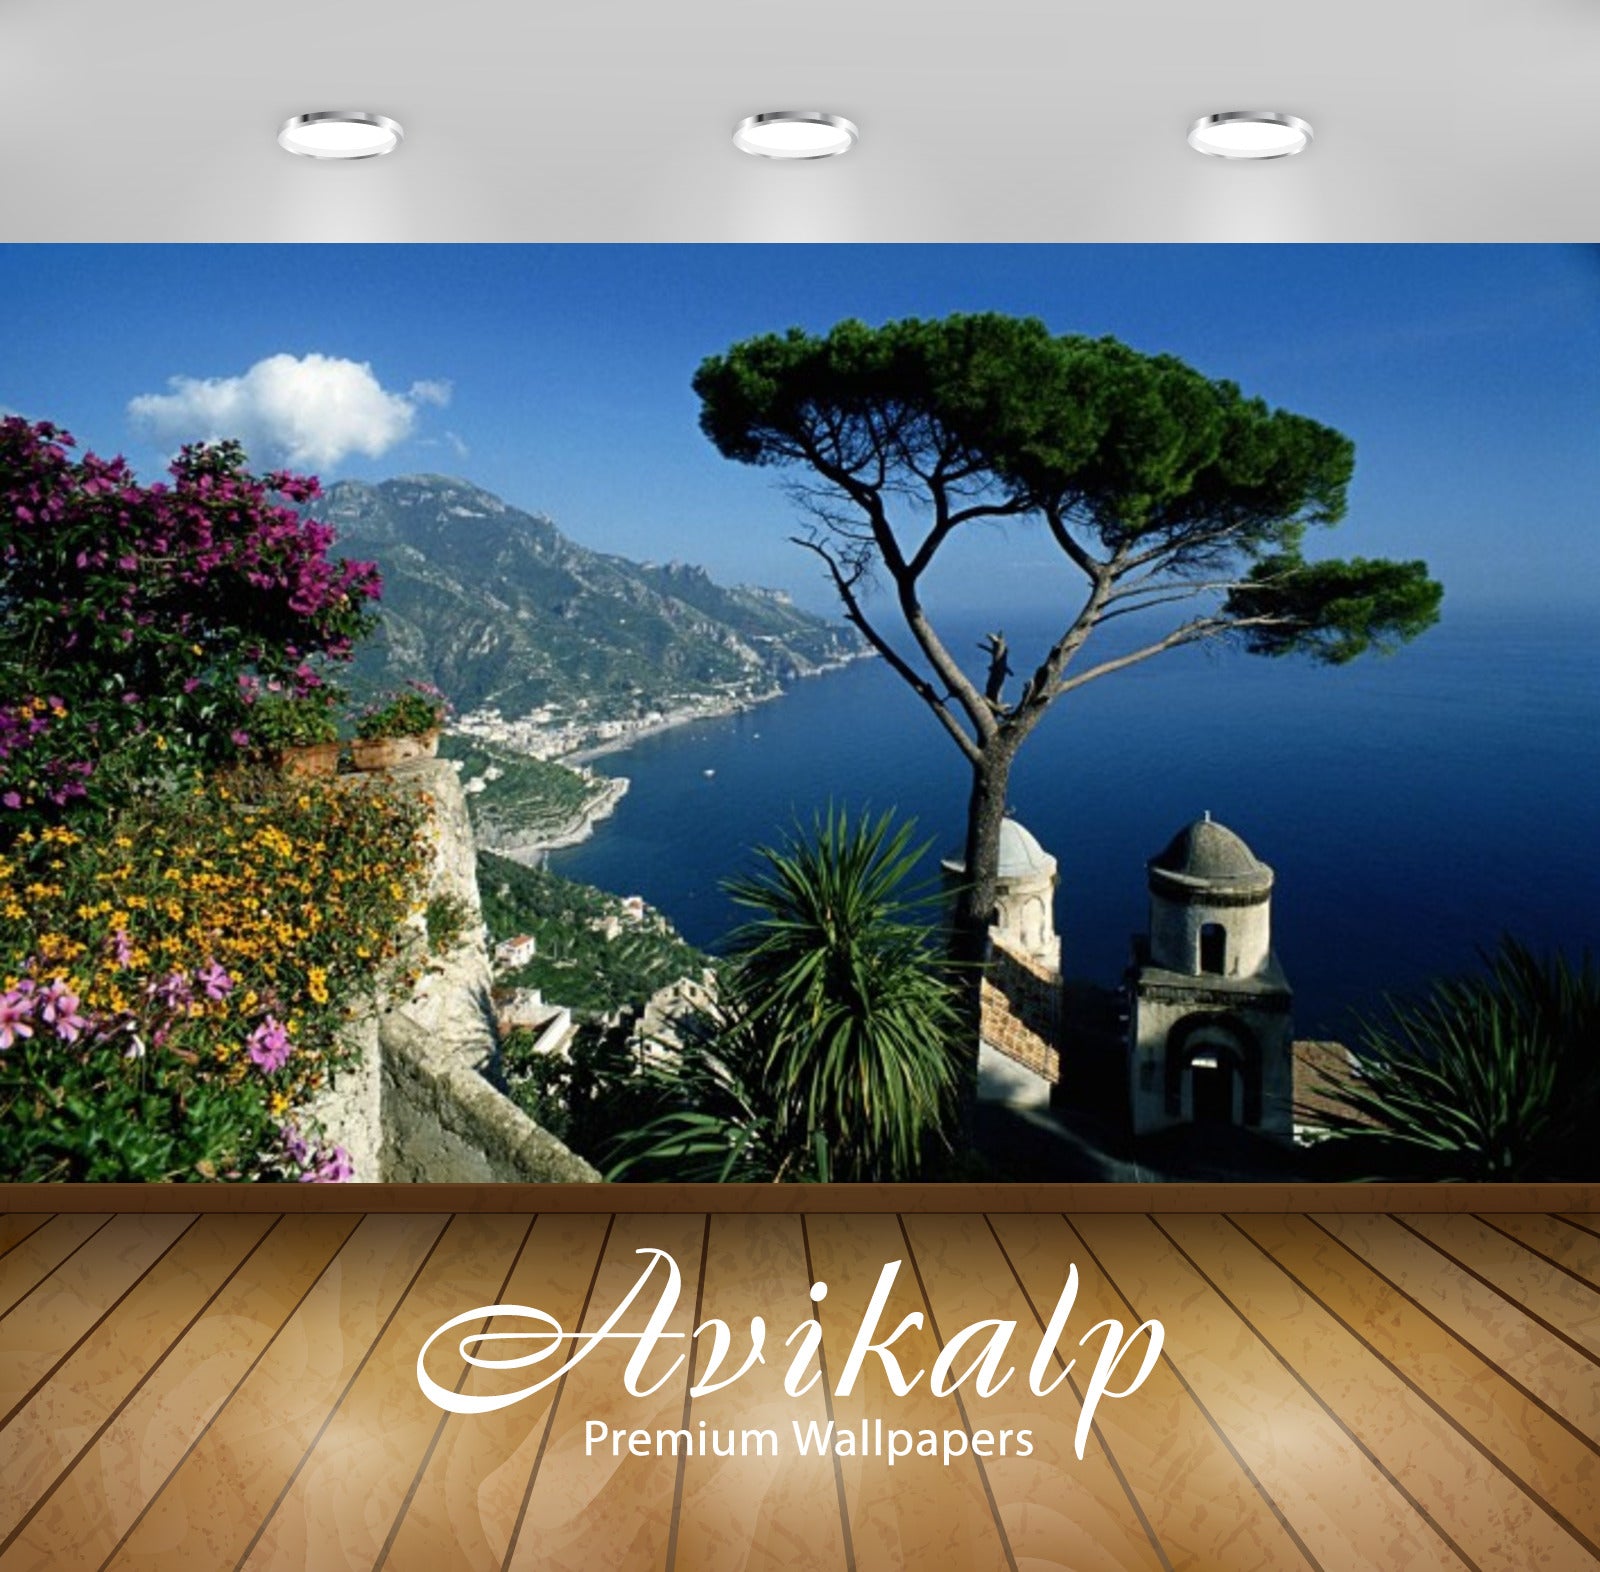 Avikalp Exclusive Awi2363 Amalfi Coast Full HD Wallpapers for Living room, Hall, Kids Room, Kitchen,